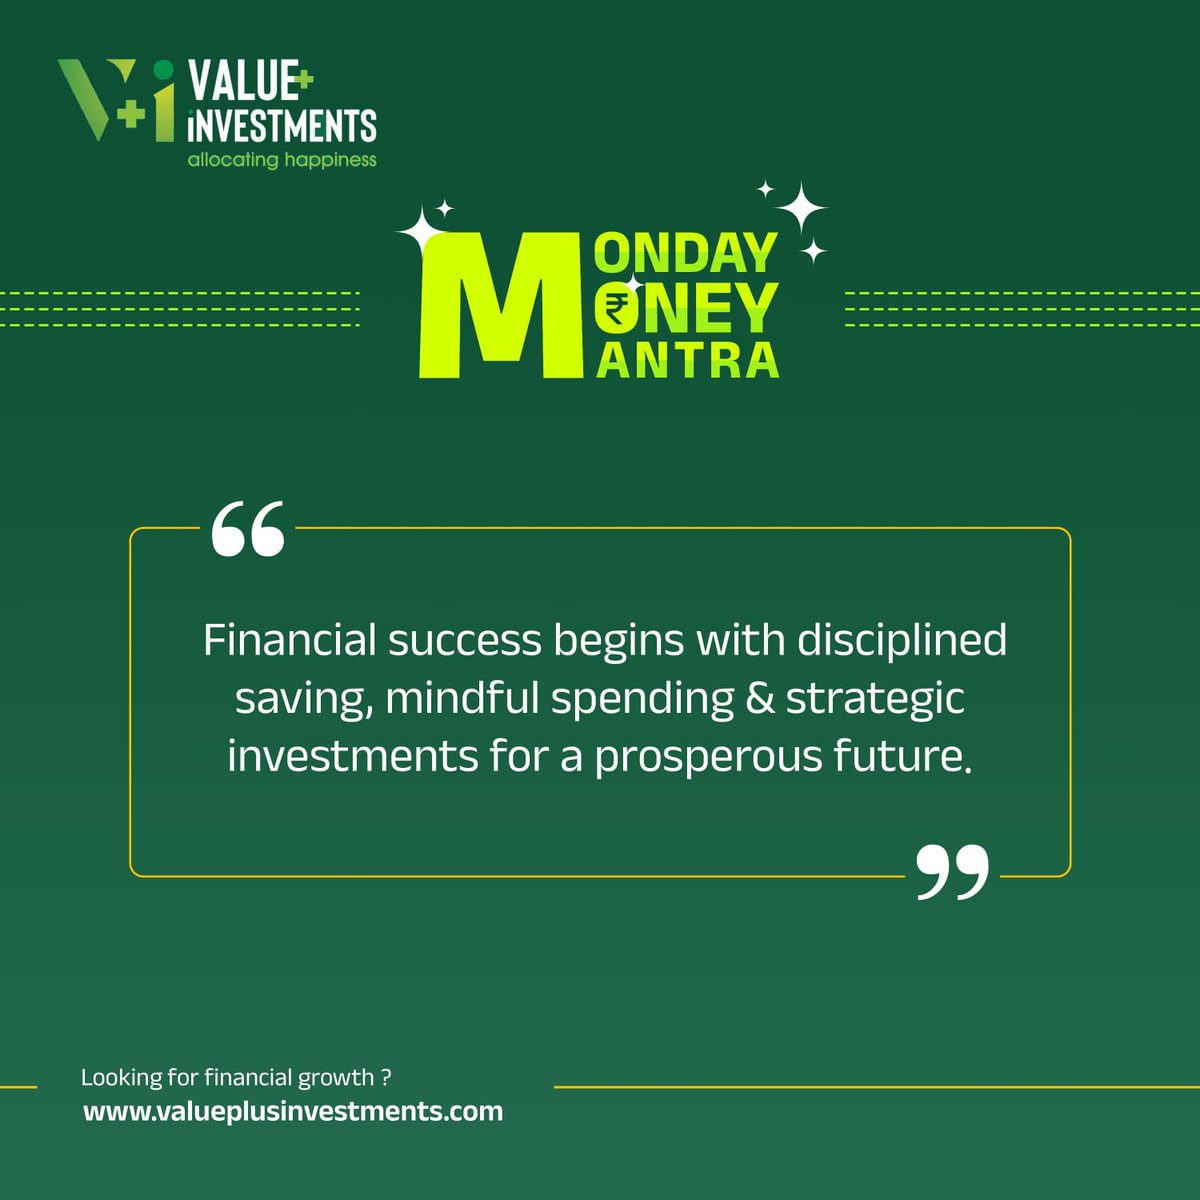 Discipline your savings, spend mindfully, and make strategic investments for a prosperous future.

#ValuePlusInvestments
#FinancialSuccess #WealthManagement #SmartSaving #StrategicInvesting #MoneyMatters #FinancialFreedom #InvestmentStrategies #FinancialPlanning #ProsperityGoals